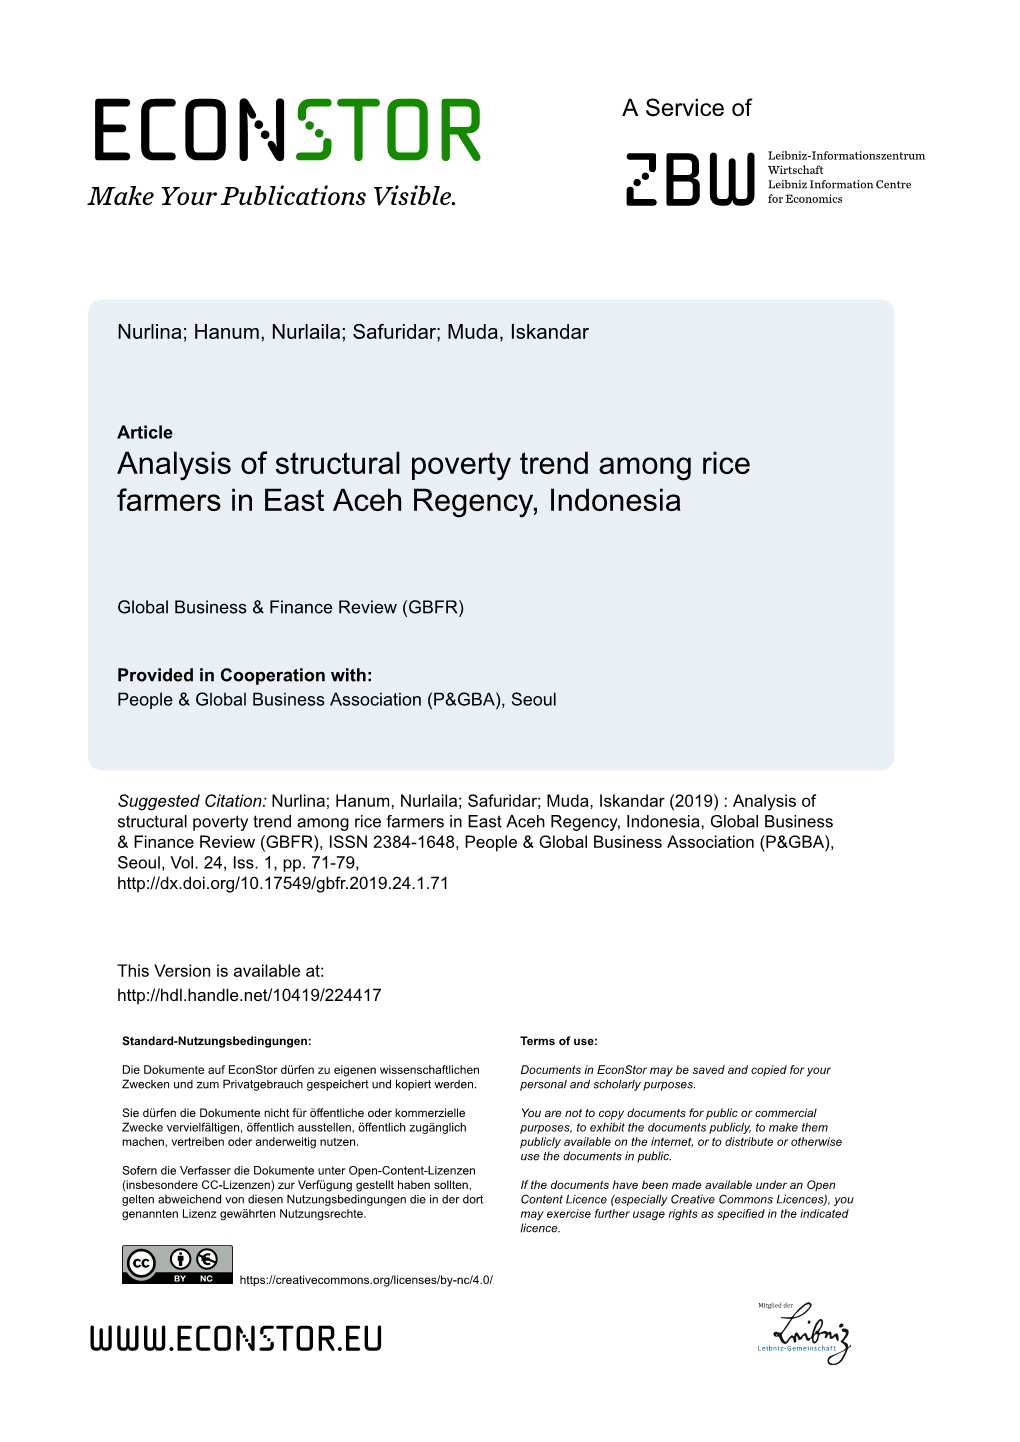 Analysis of Structural Poverty Trend Among Rice Farmers in East Aceh Regency, Indonesia